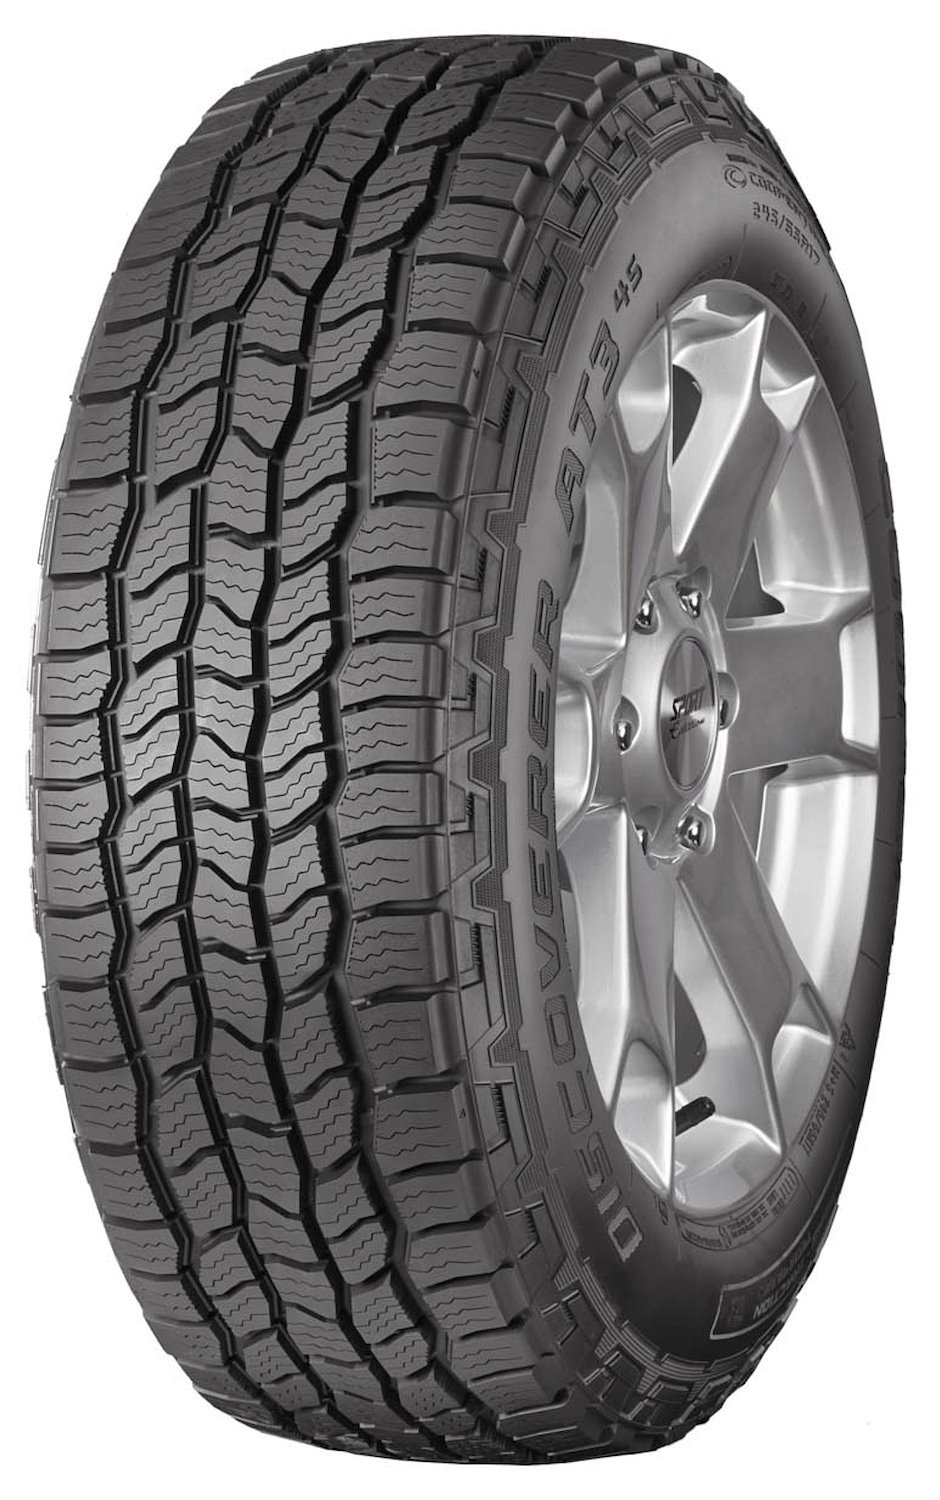 Discoverer AT3 4S All-Terrain Tire, 245/75R16